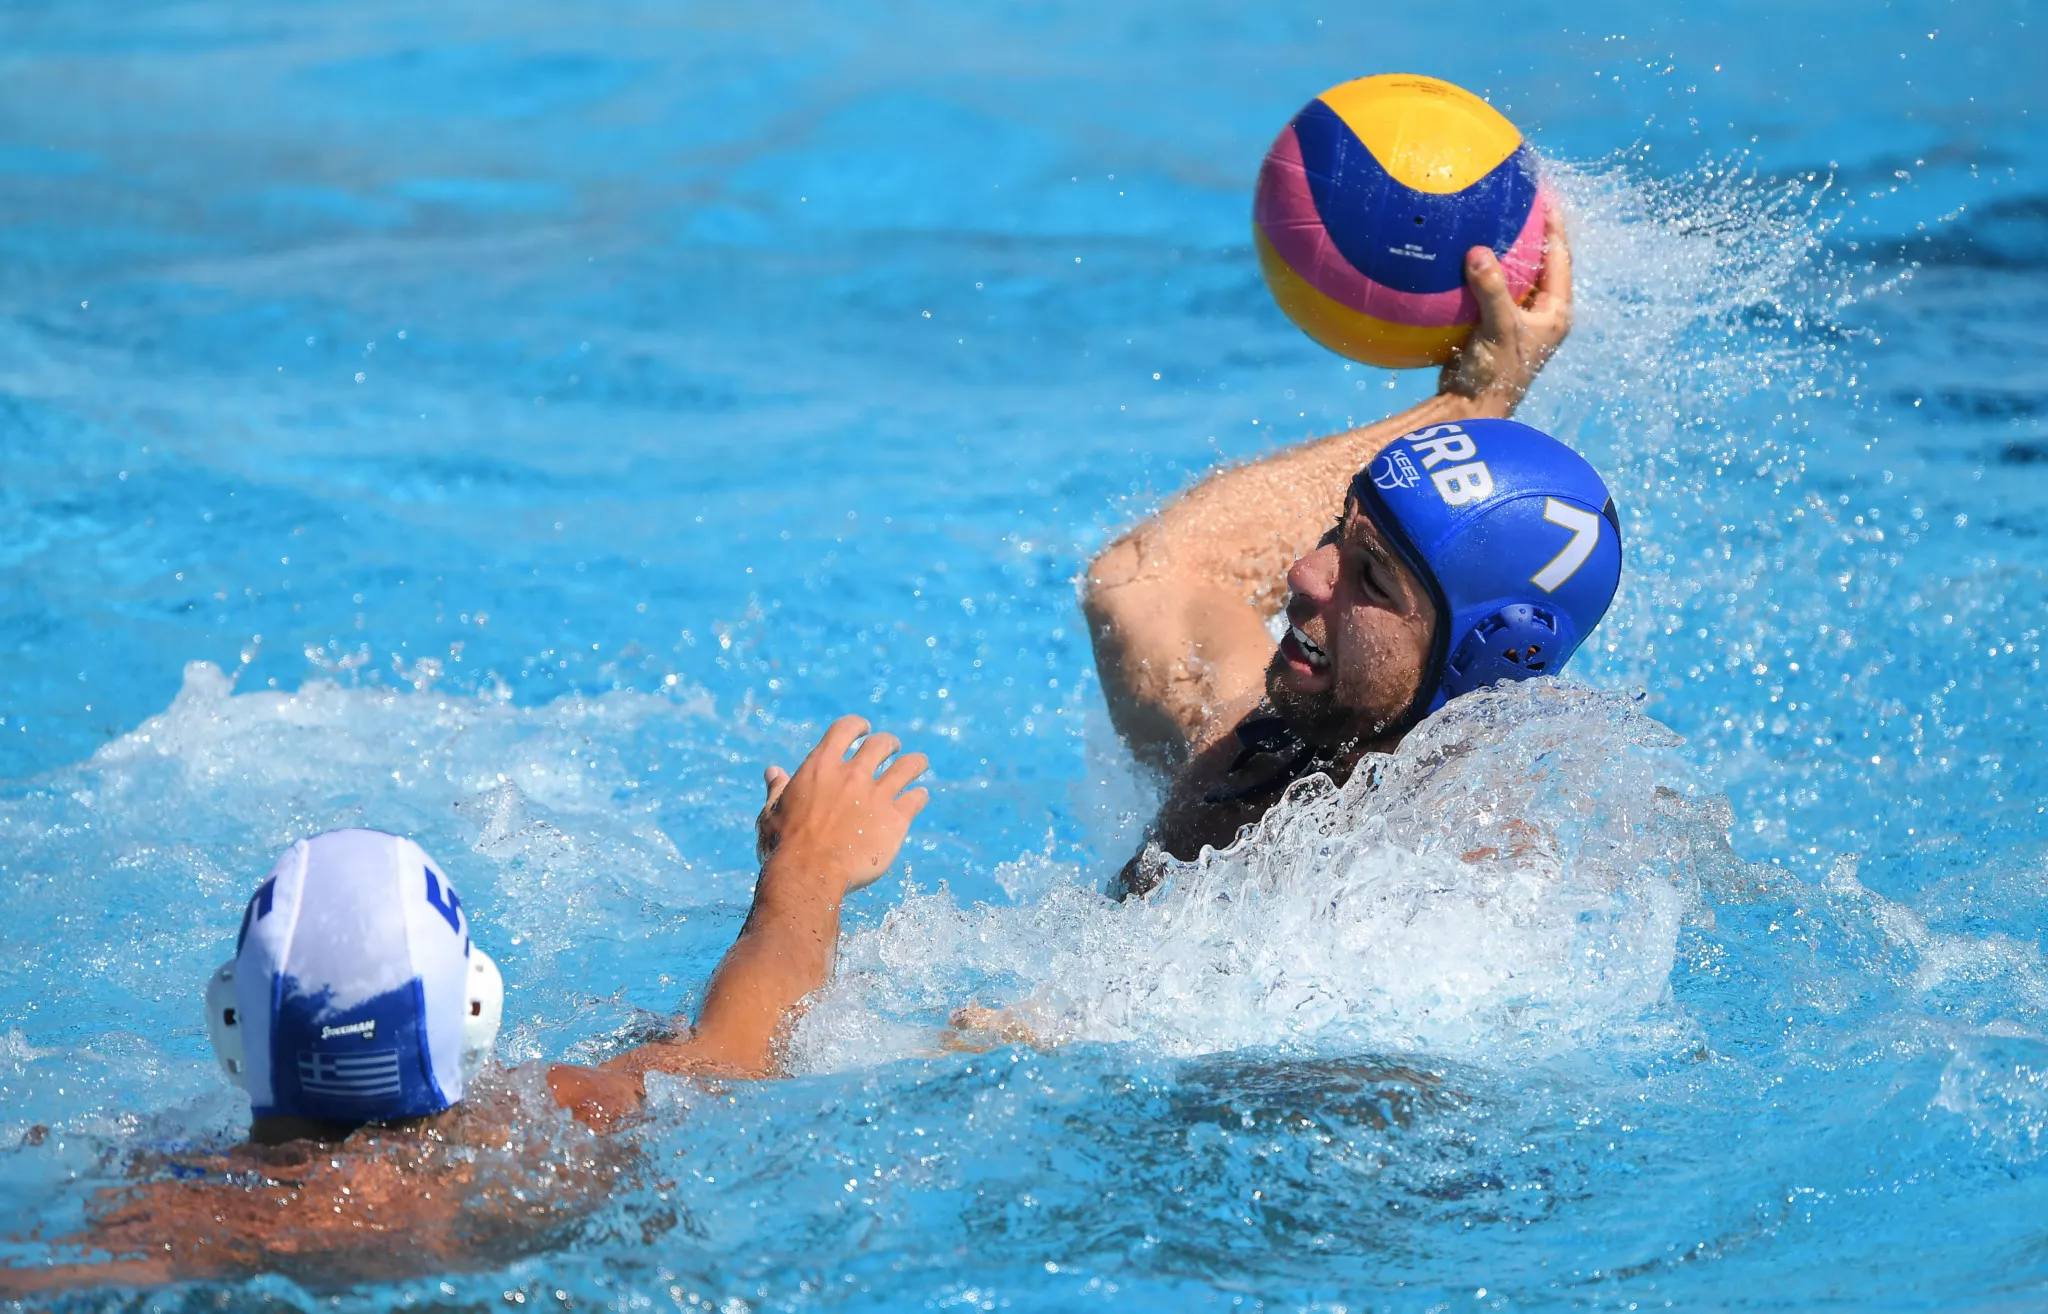 Water Polo Federation of Serbia in Serbia, Europe | Water Polo - Rated 2